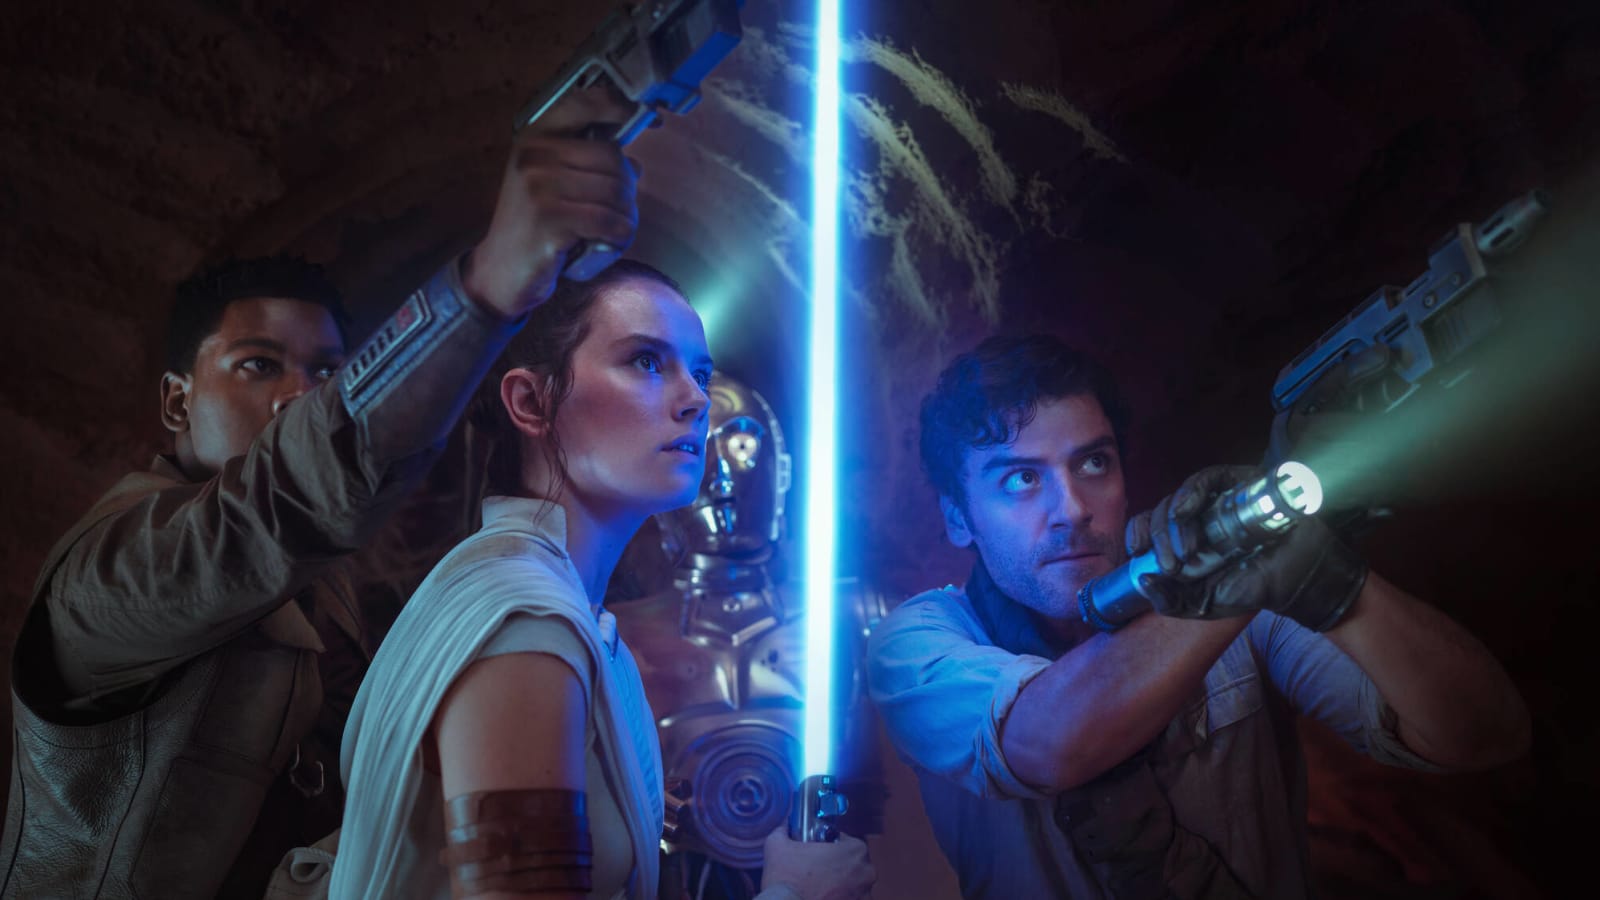 20 facts you might not know about 'The Rise of Skywalker'